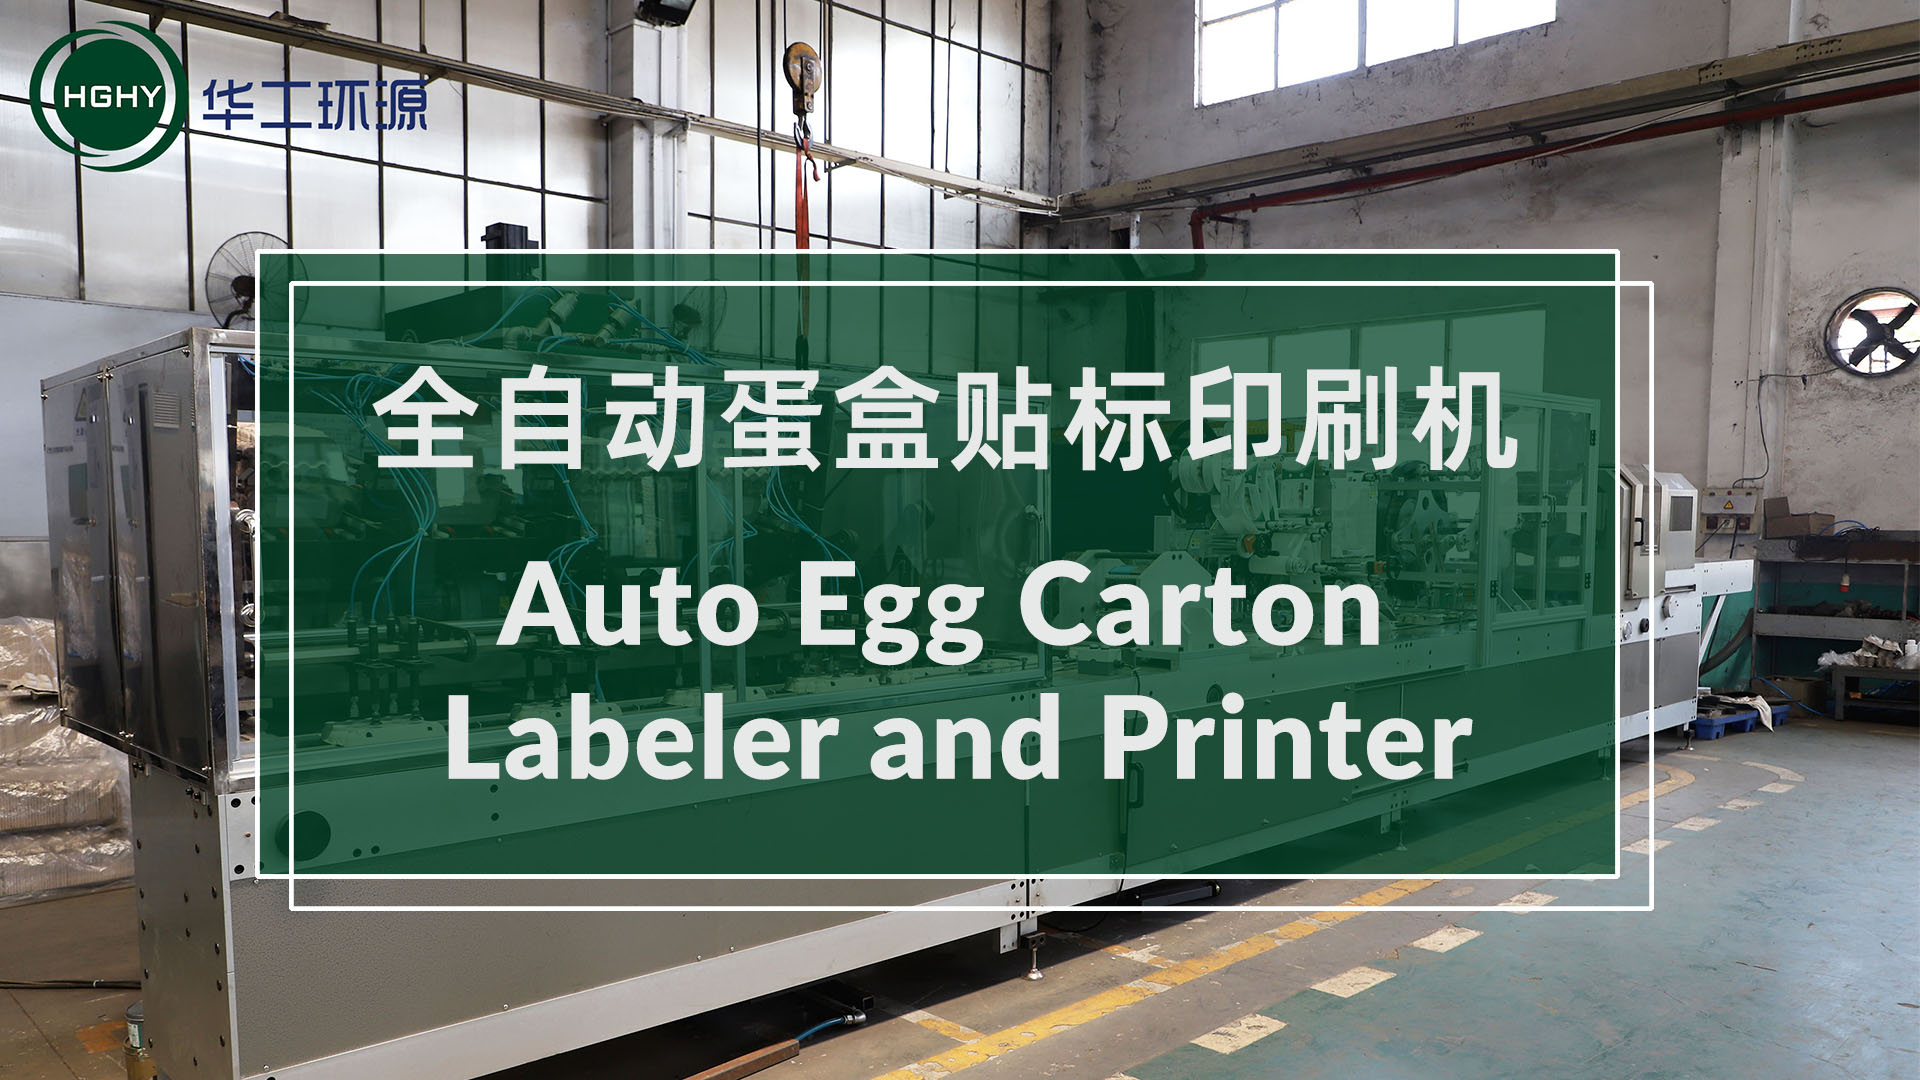 The First Set of Auto Egg Carton Labeler and Printer Unveiled Successfully!